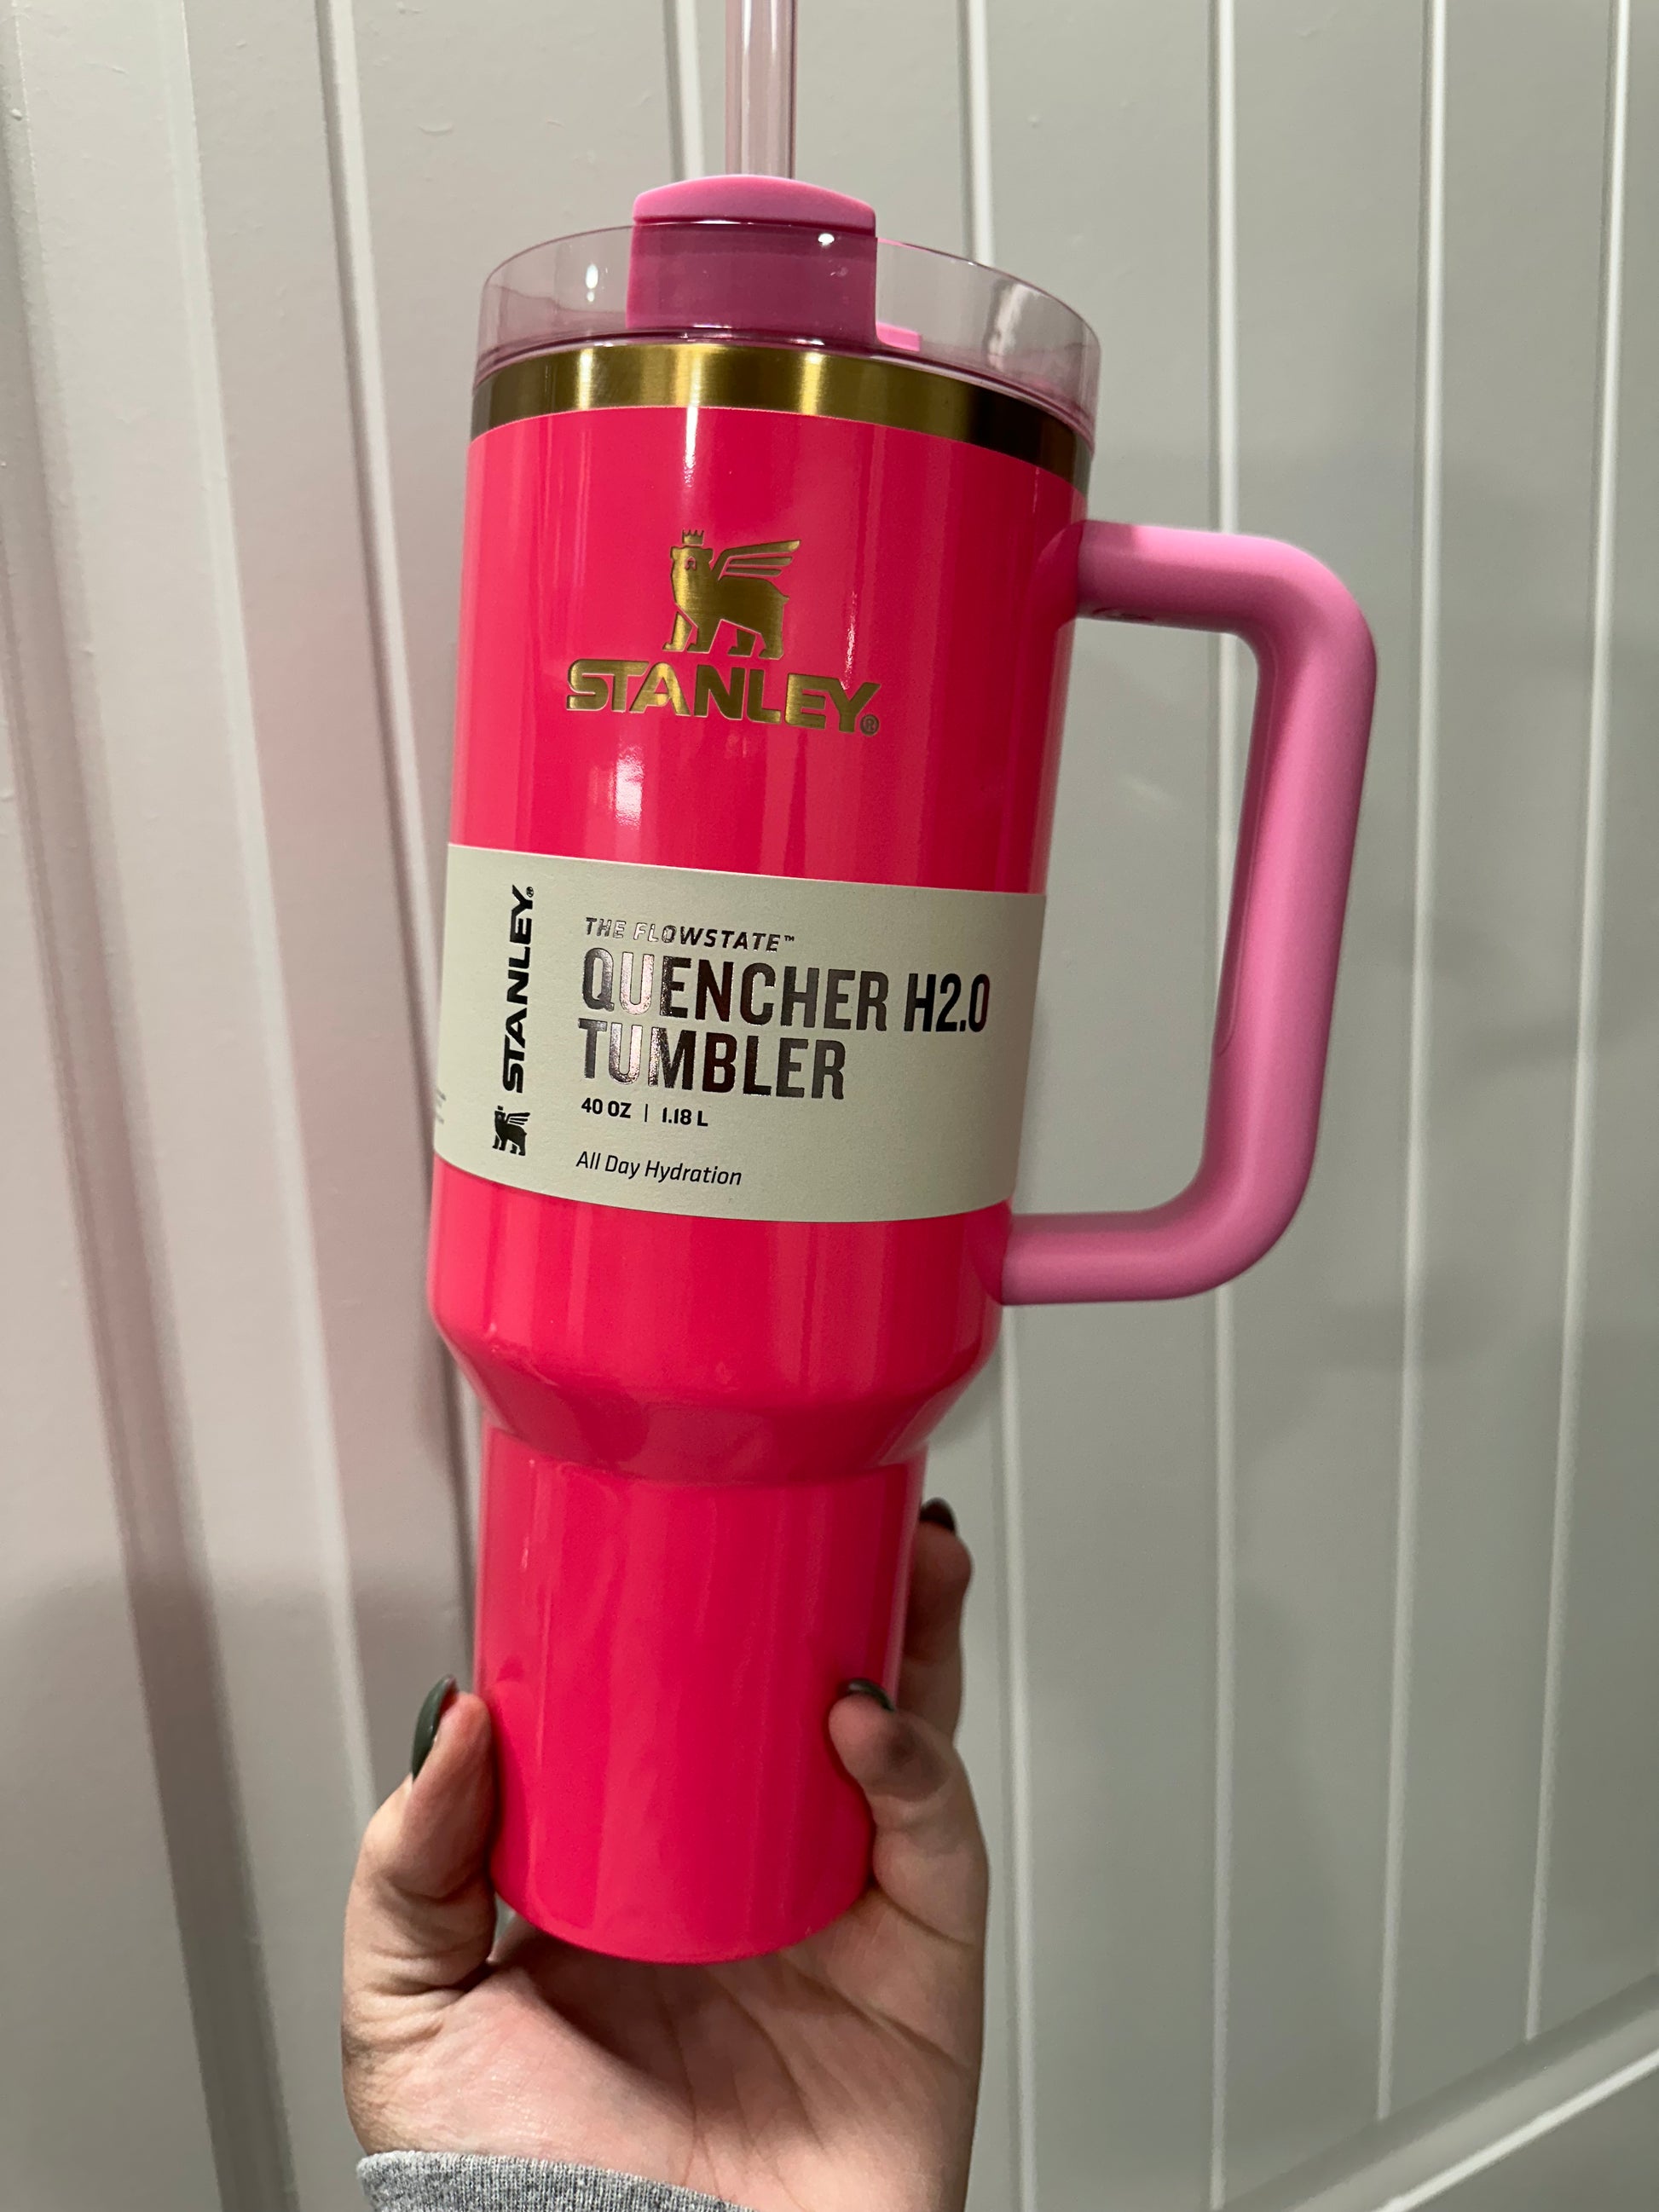 Stanley Cup Quencher H2.0 Tumbler 40oz Peach Target Exclusive In Hand